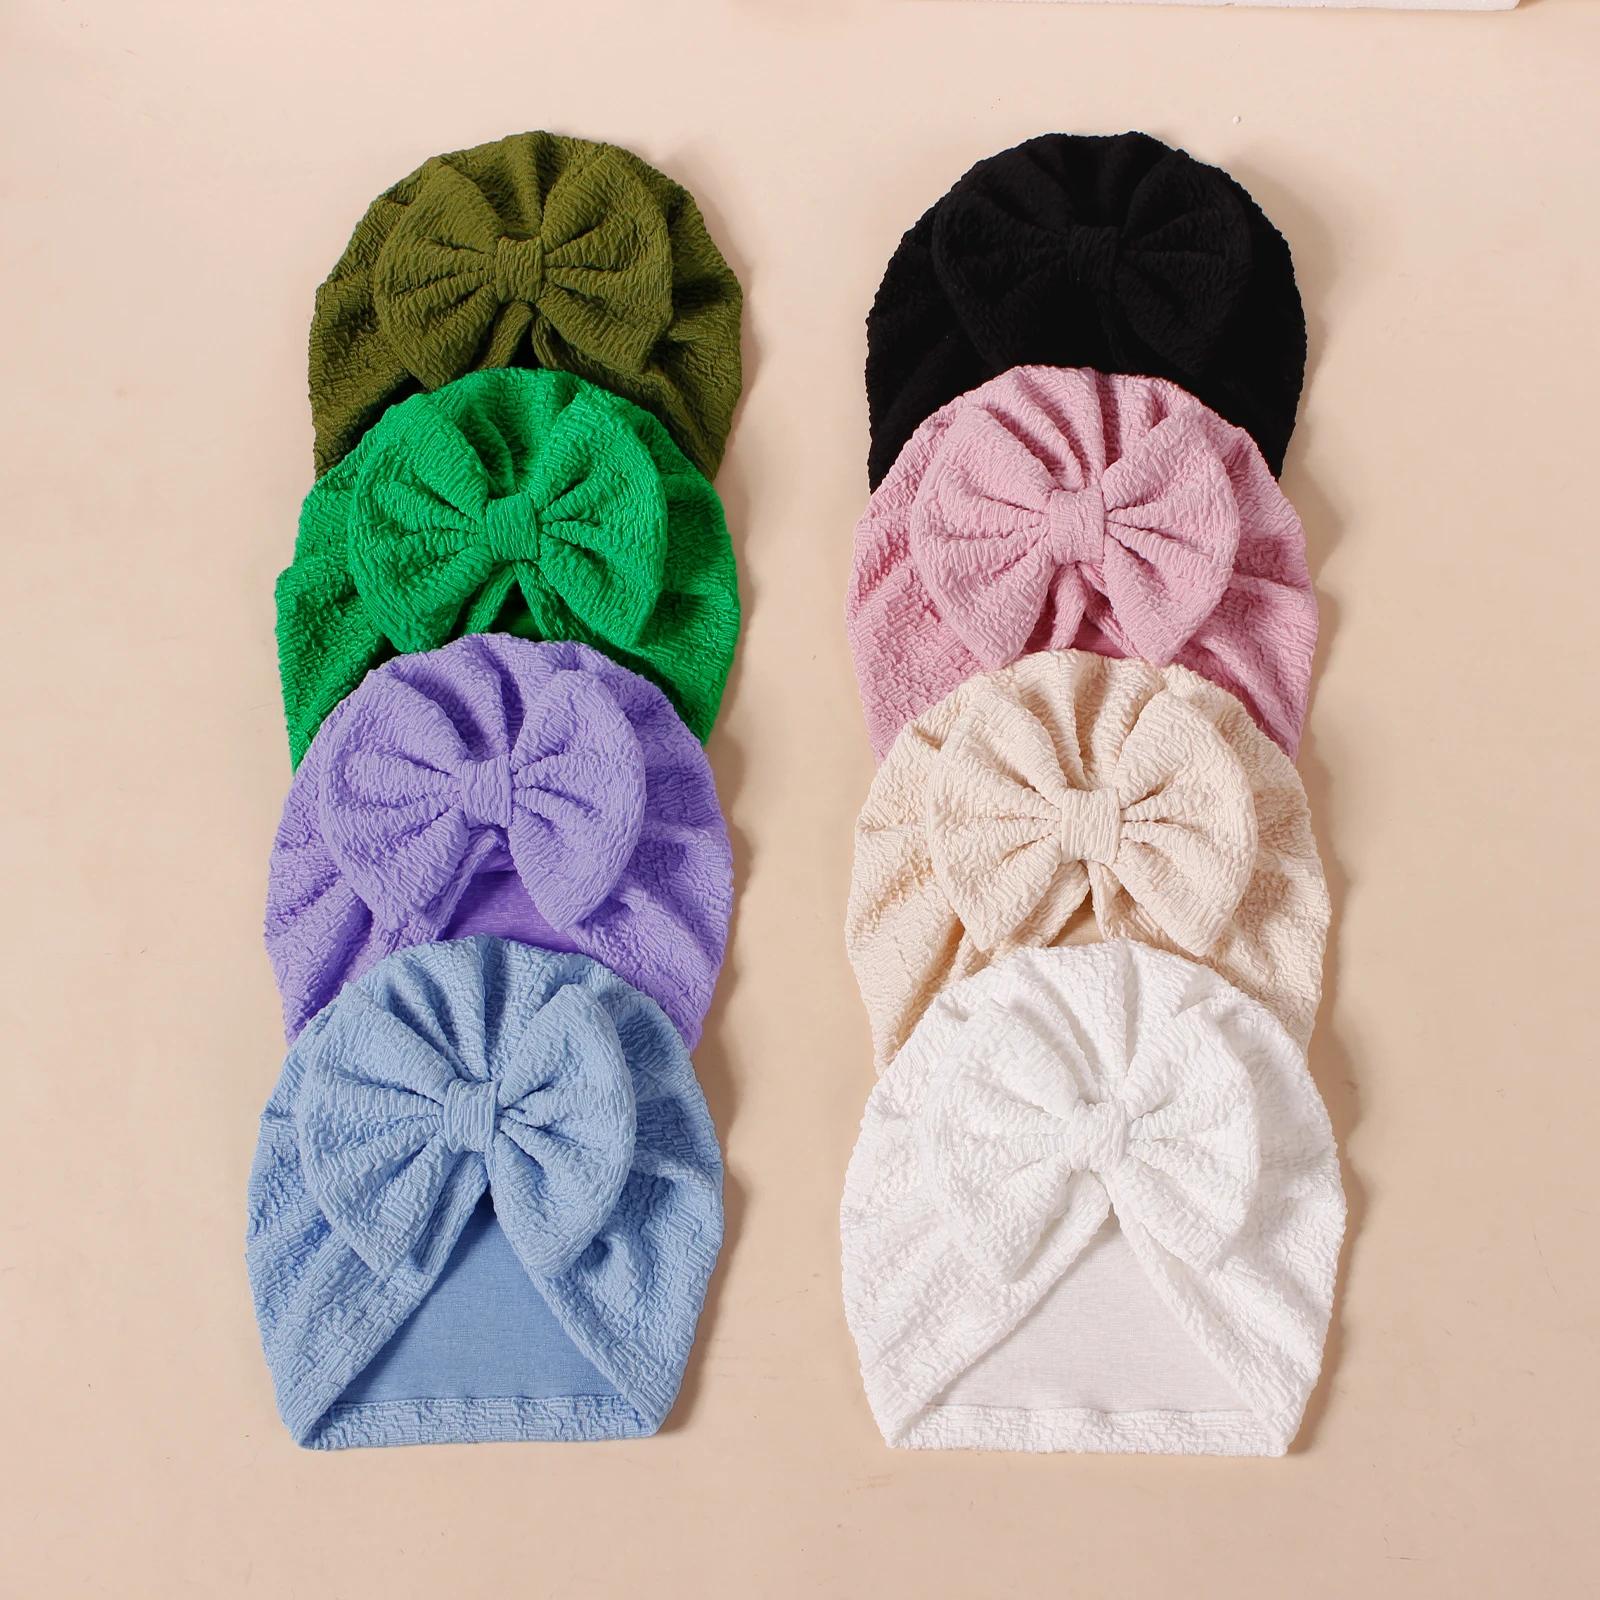 New Soft Cotton Bowknot Turban Babes Solid Color HeadWraps Solid Baby India Hat Kid Girl Infant Beanie Cap Toddler Baby Headwear stretchable baby headband comfortable bowknot turban hat soft